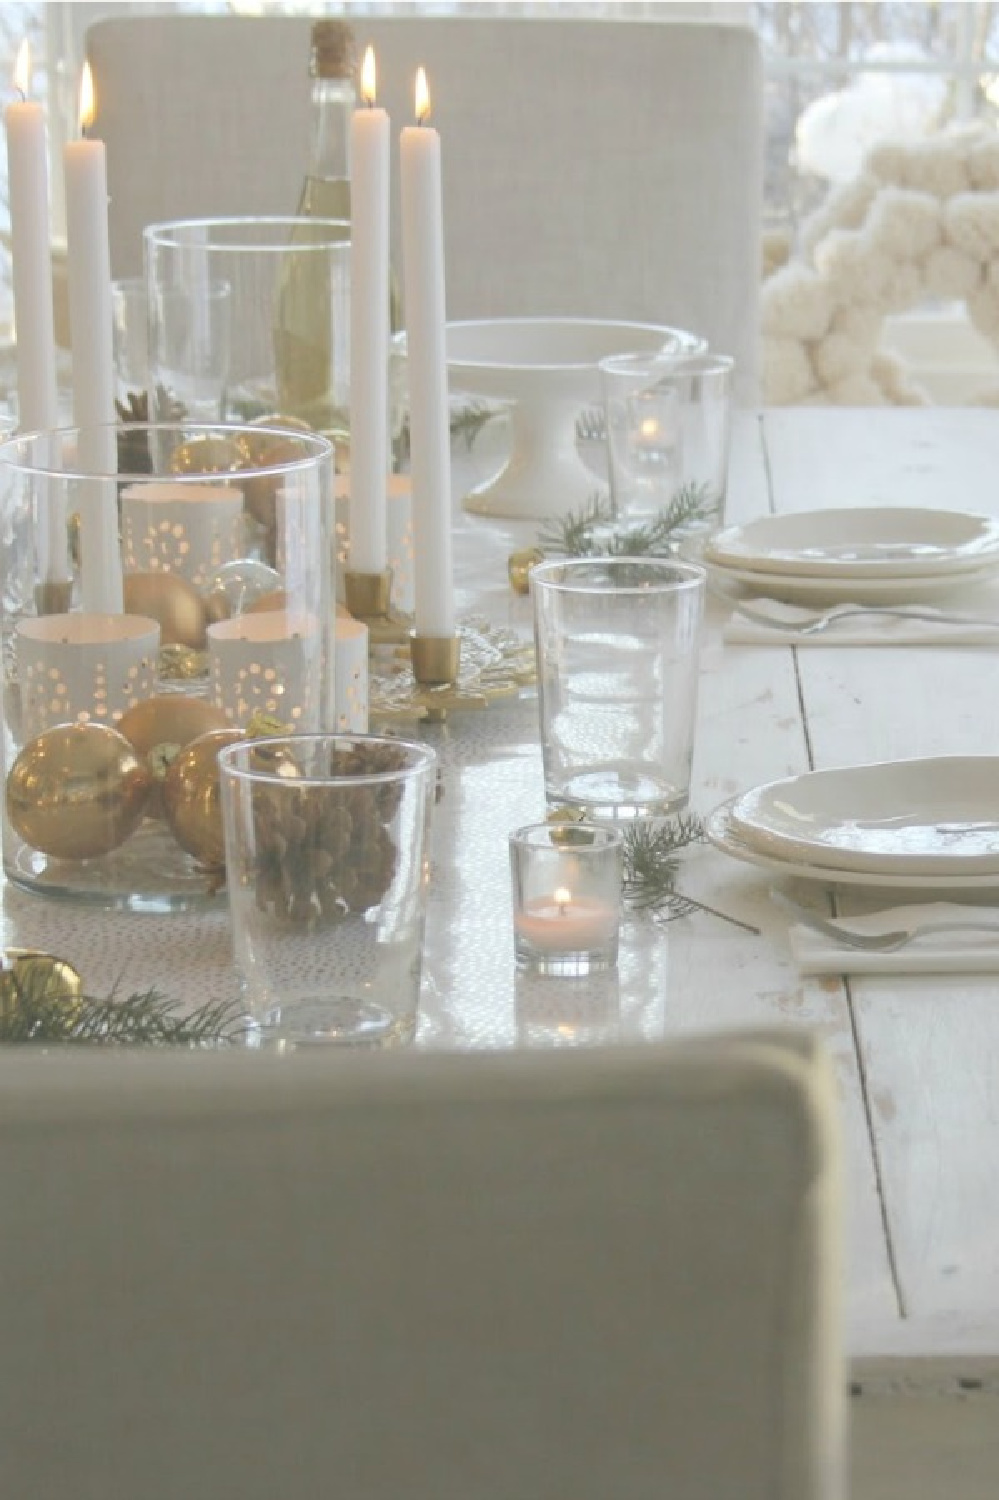 Gold and white Christmas table - Hello Lovely Studio. #farmhousechristmas #christmastablescape #hellolovelychristmas